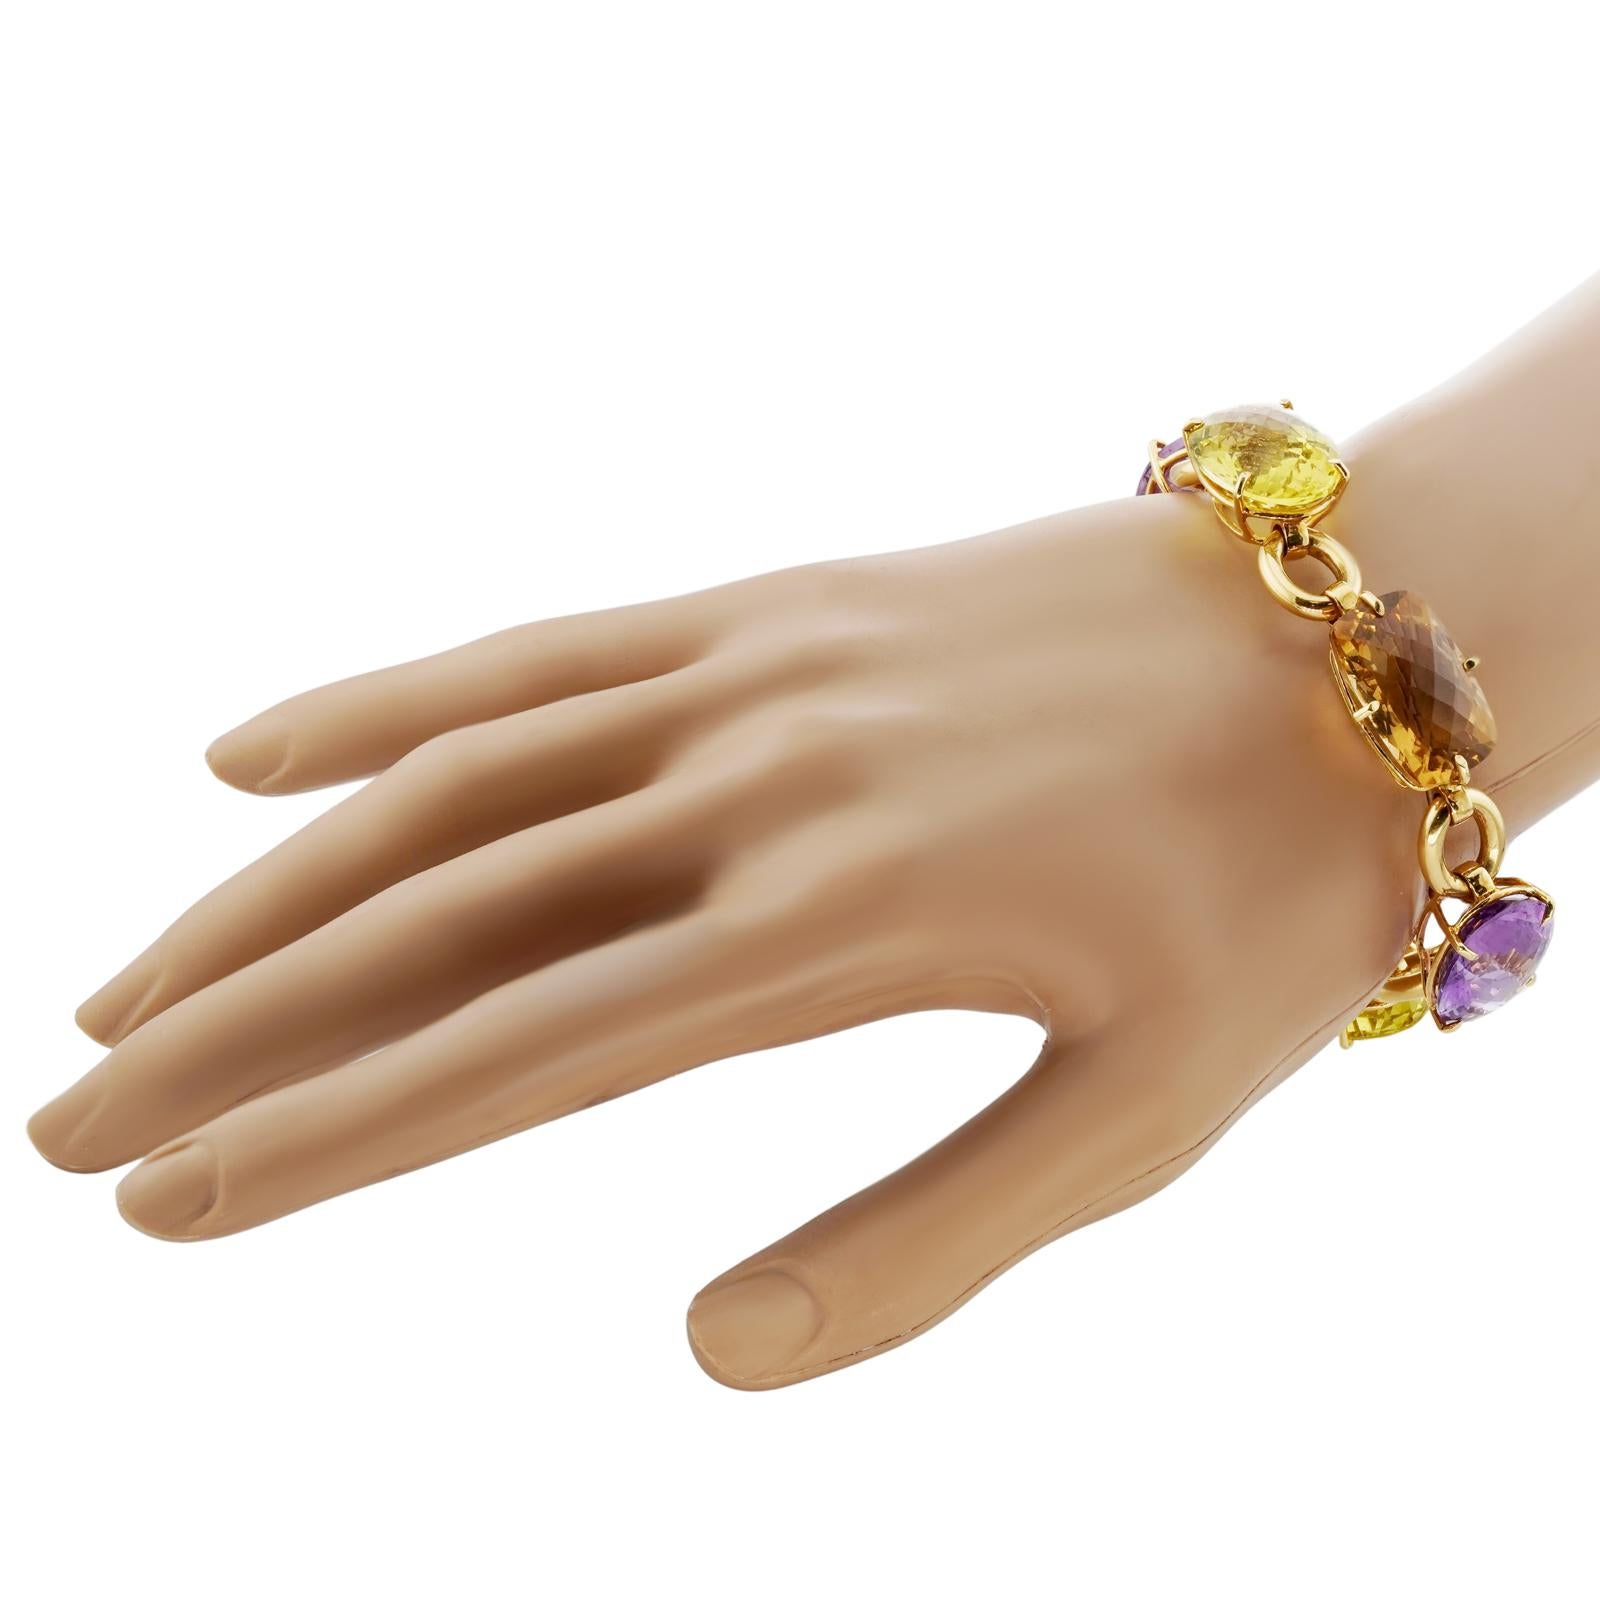 This chic authentic Robert Coin bracelet is crafted in 18k yellow gold and set with vibrant faceted oval gemstones - amethyst, yellow topaz, and lemon citrine. Made in United States circa 2010s. Measurements: 0.66